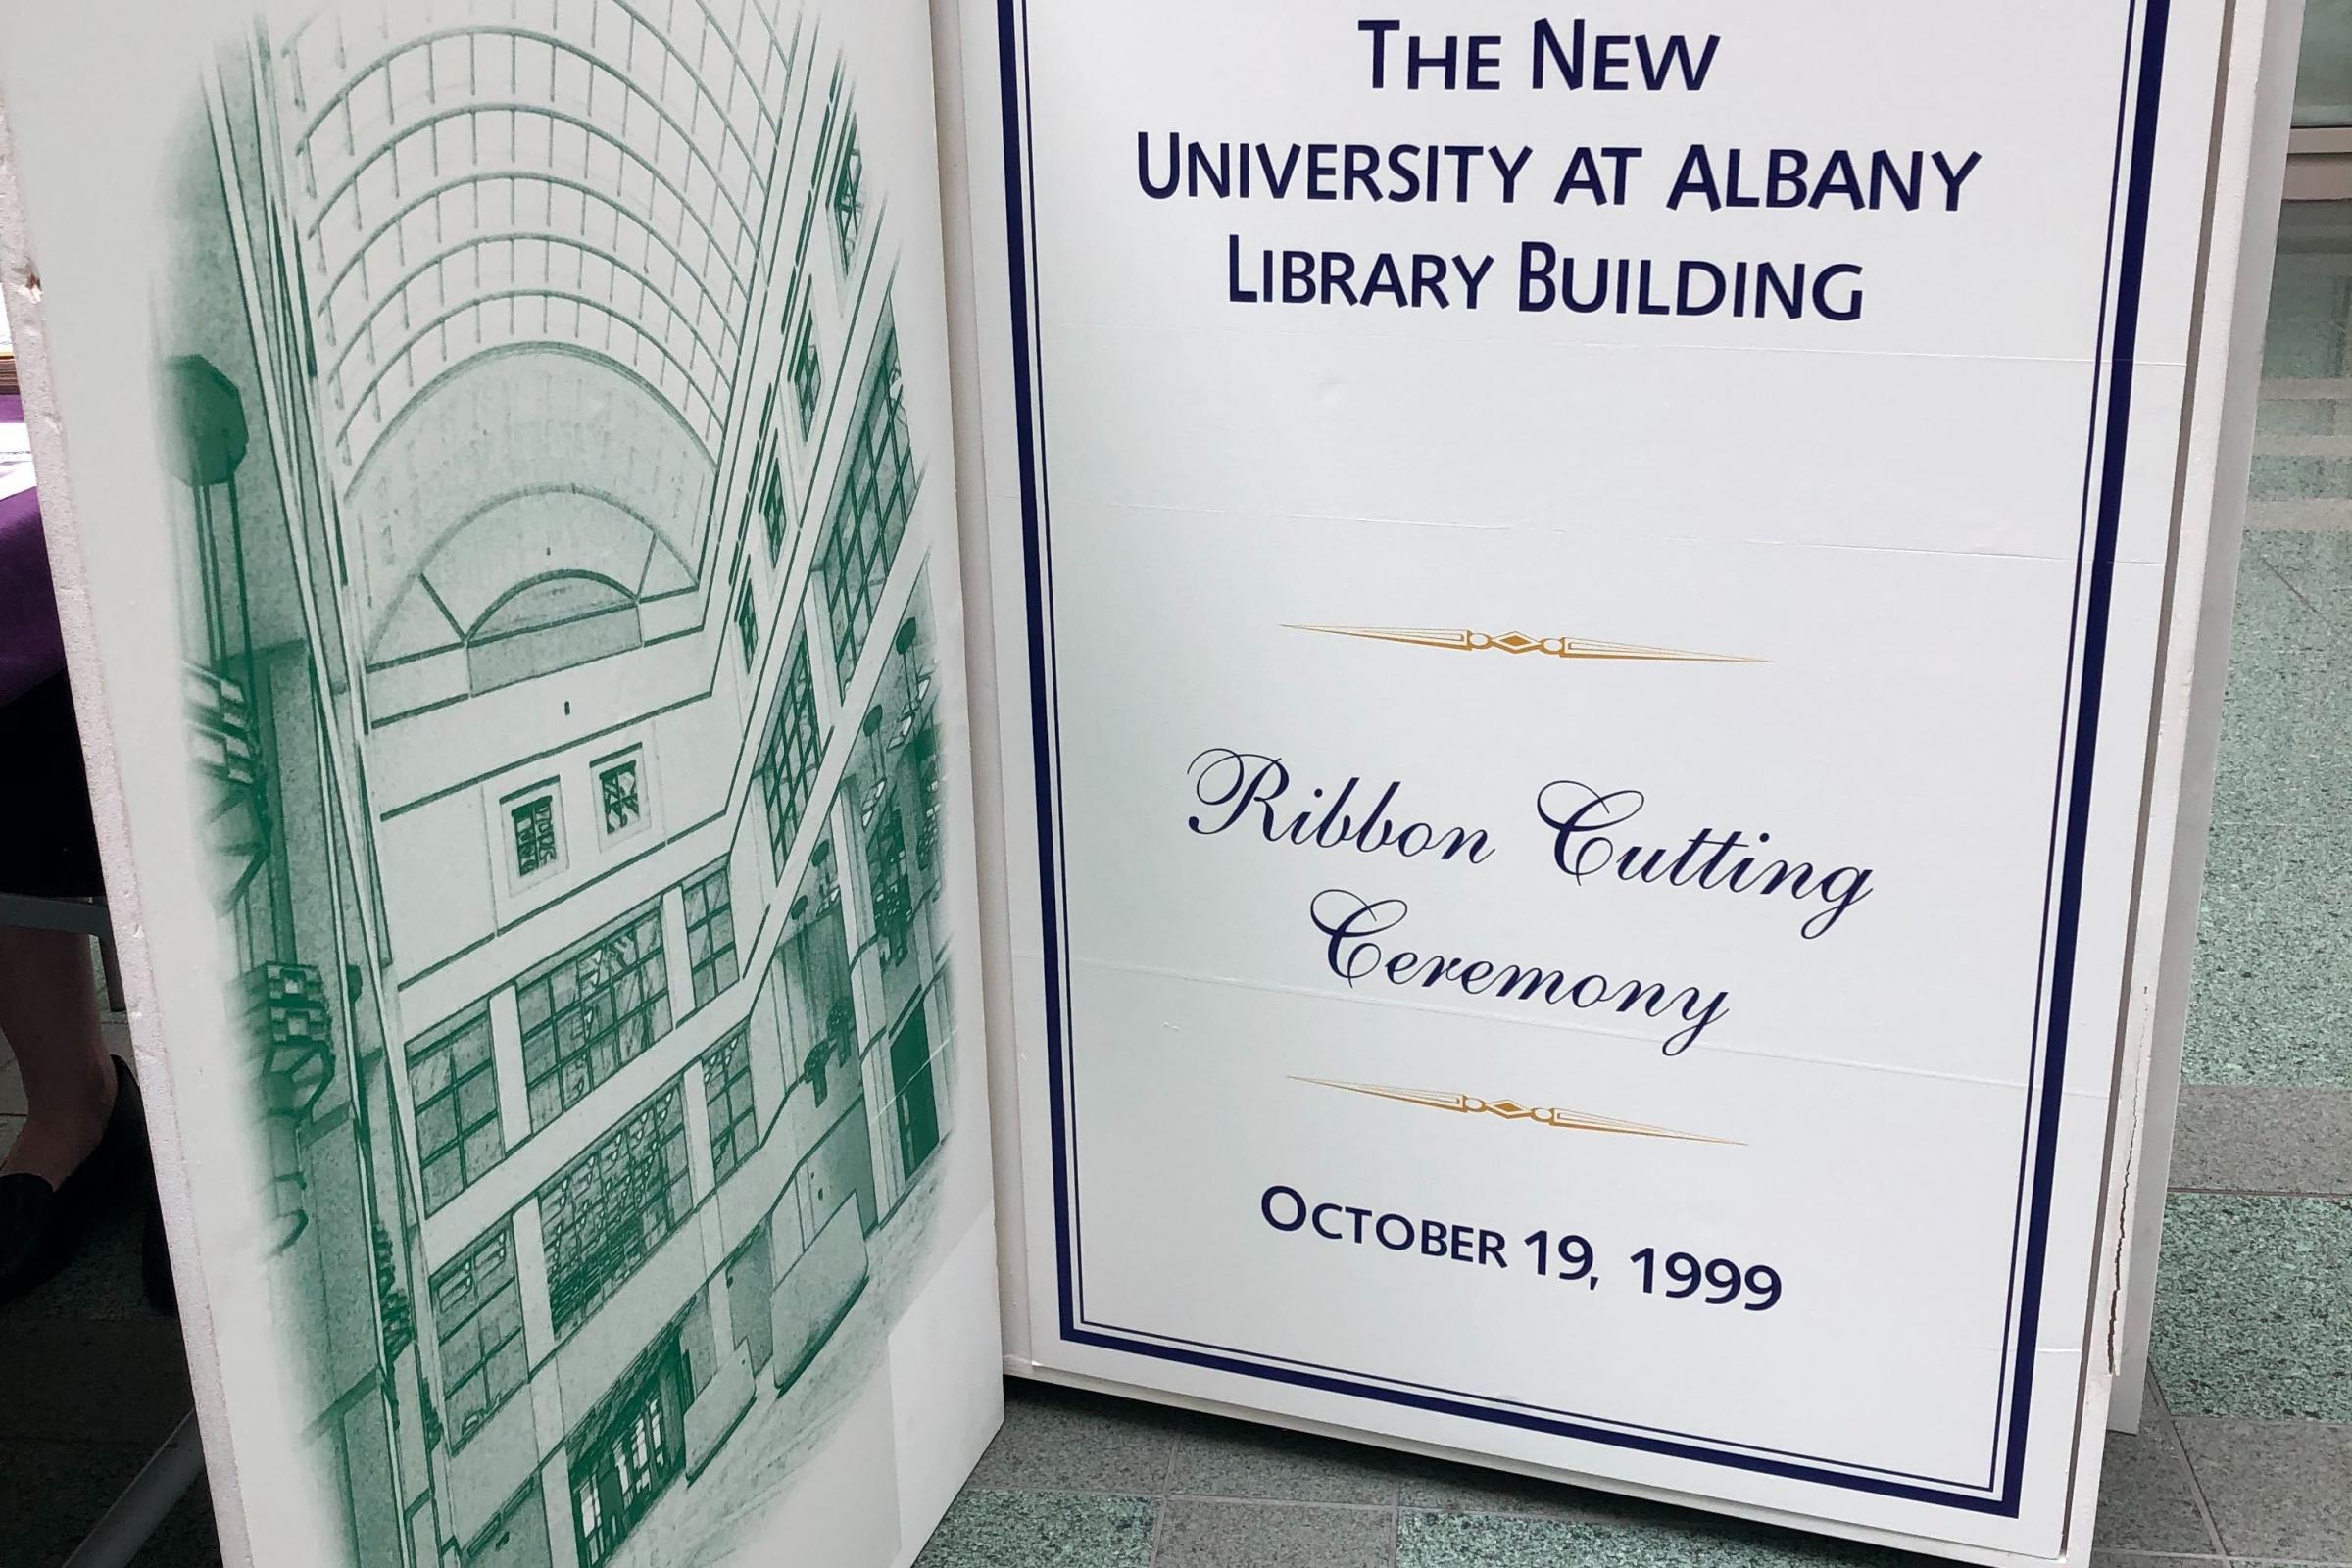 A life-size book from the opening of the Science Library